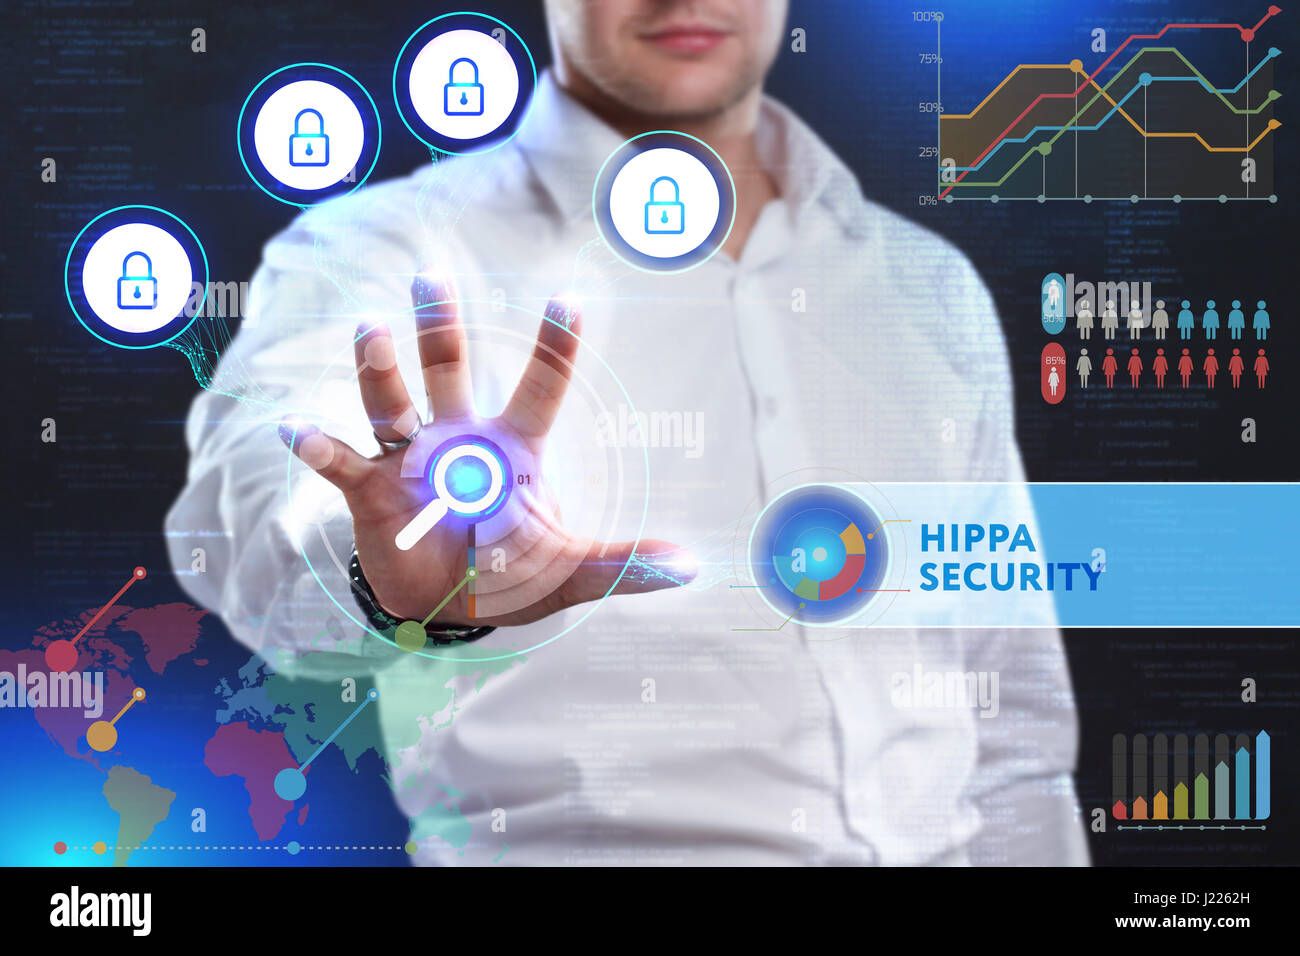 Concept of business security, safety of information from virus, crime and attack. Internet secure system. Protection system. Hippa security Stock Photo